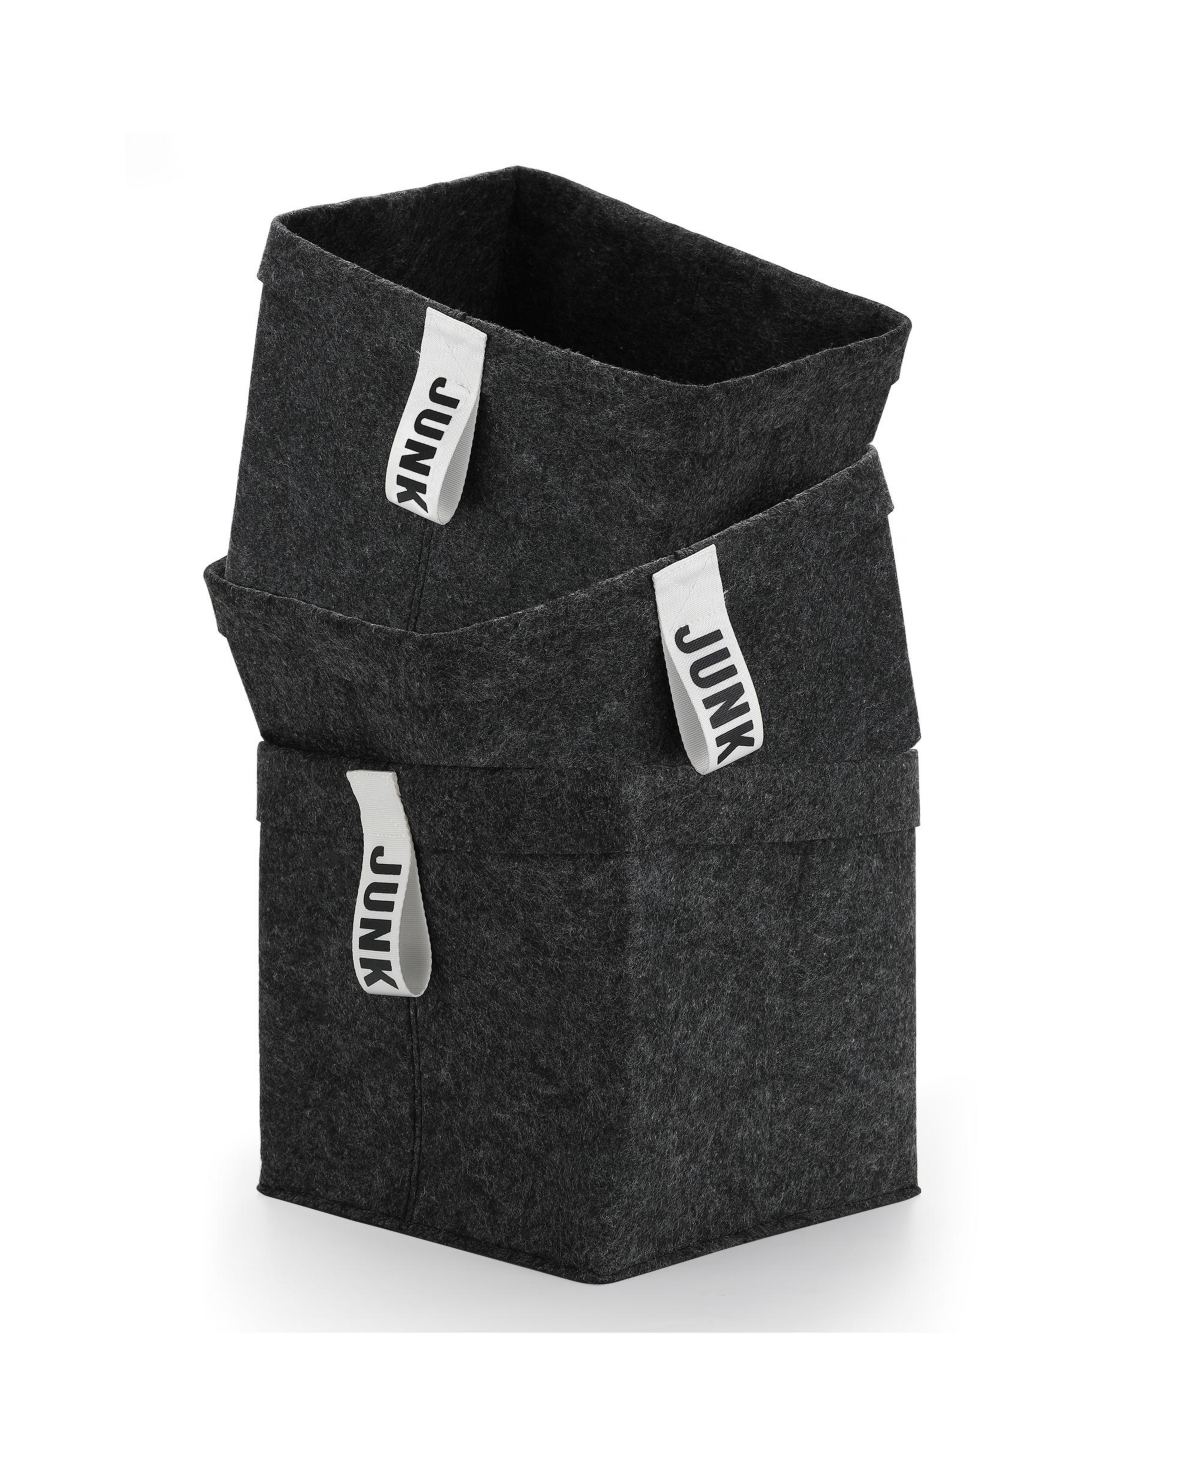 Welaxy 3 Piece Collapsible Square Storage Bins With Printed Handles In Charcoal